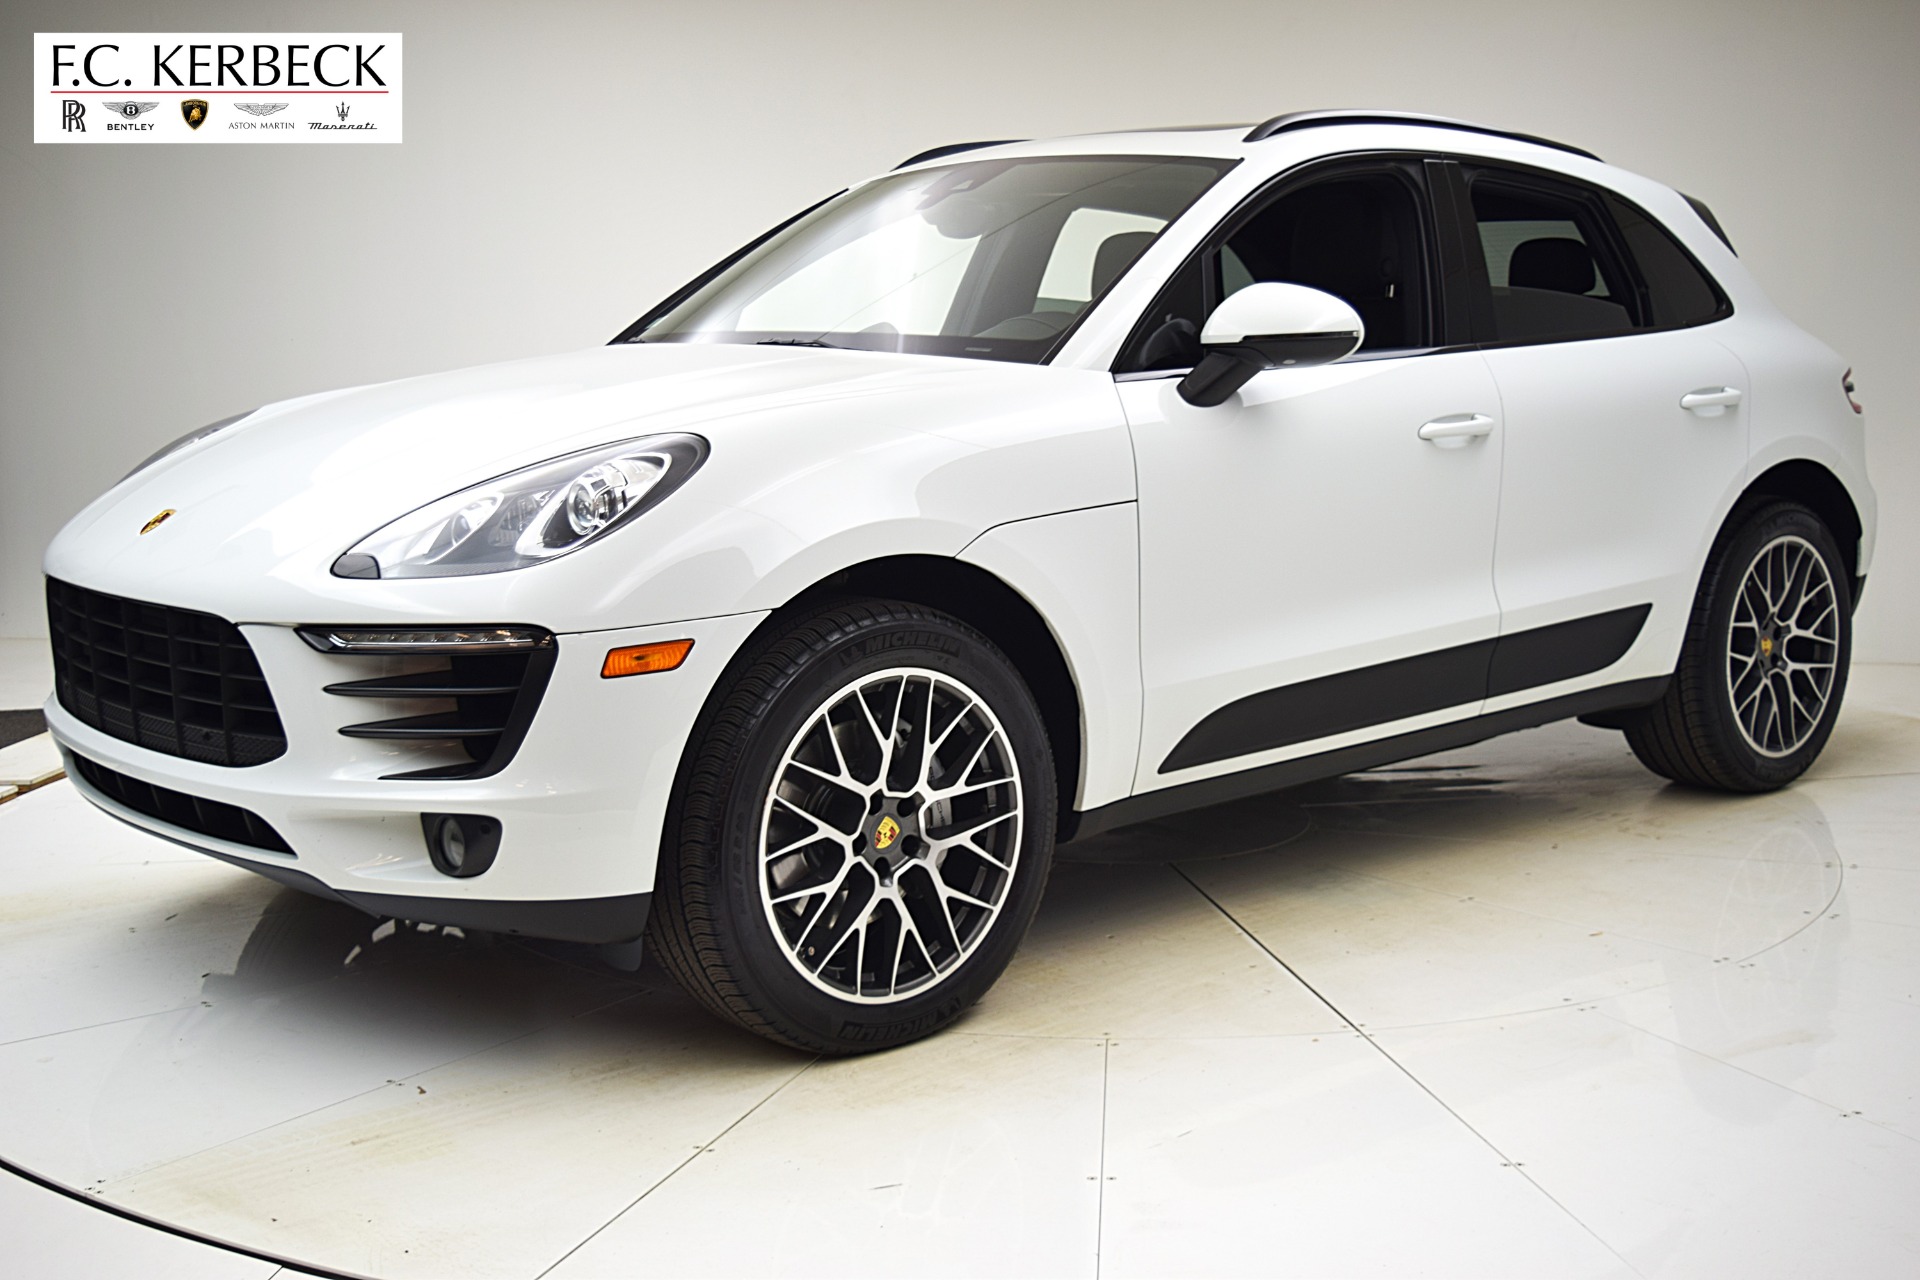 Used 2018 Porsche Macan S for sale Sold at Bentley Palmyra N.J. in Palmyra NJ 08065 2